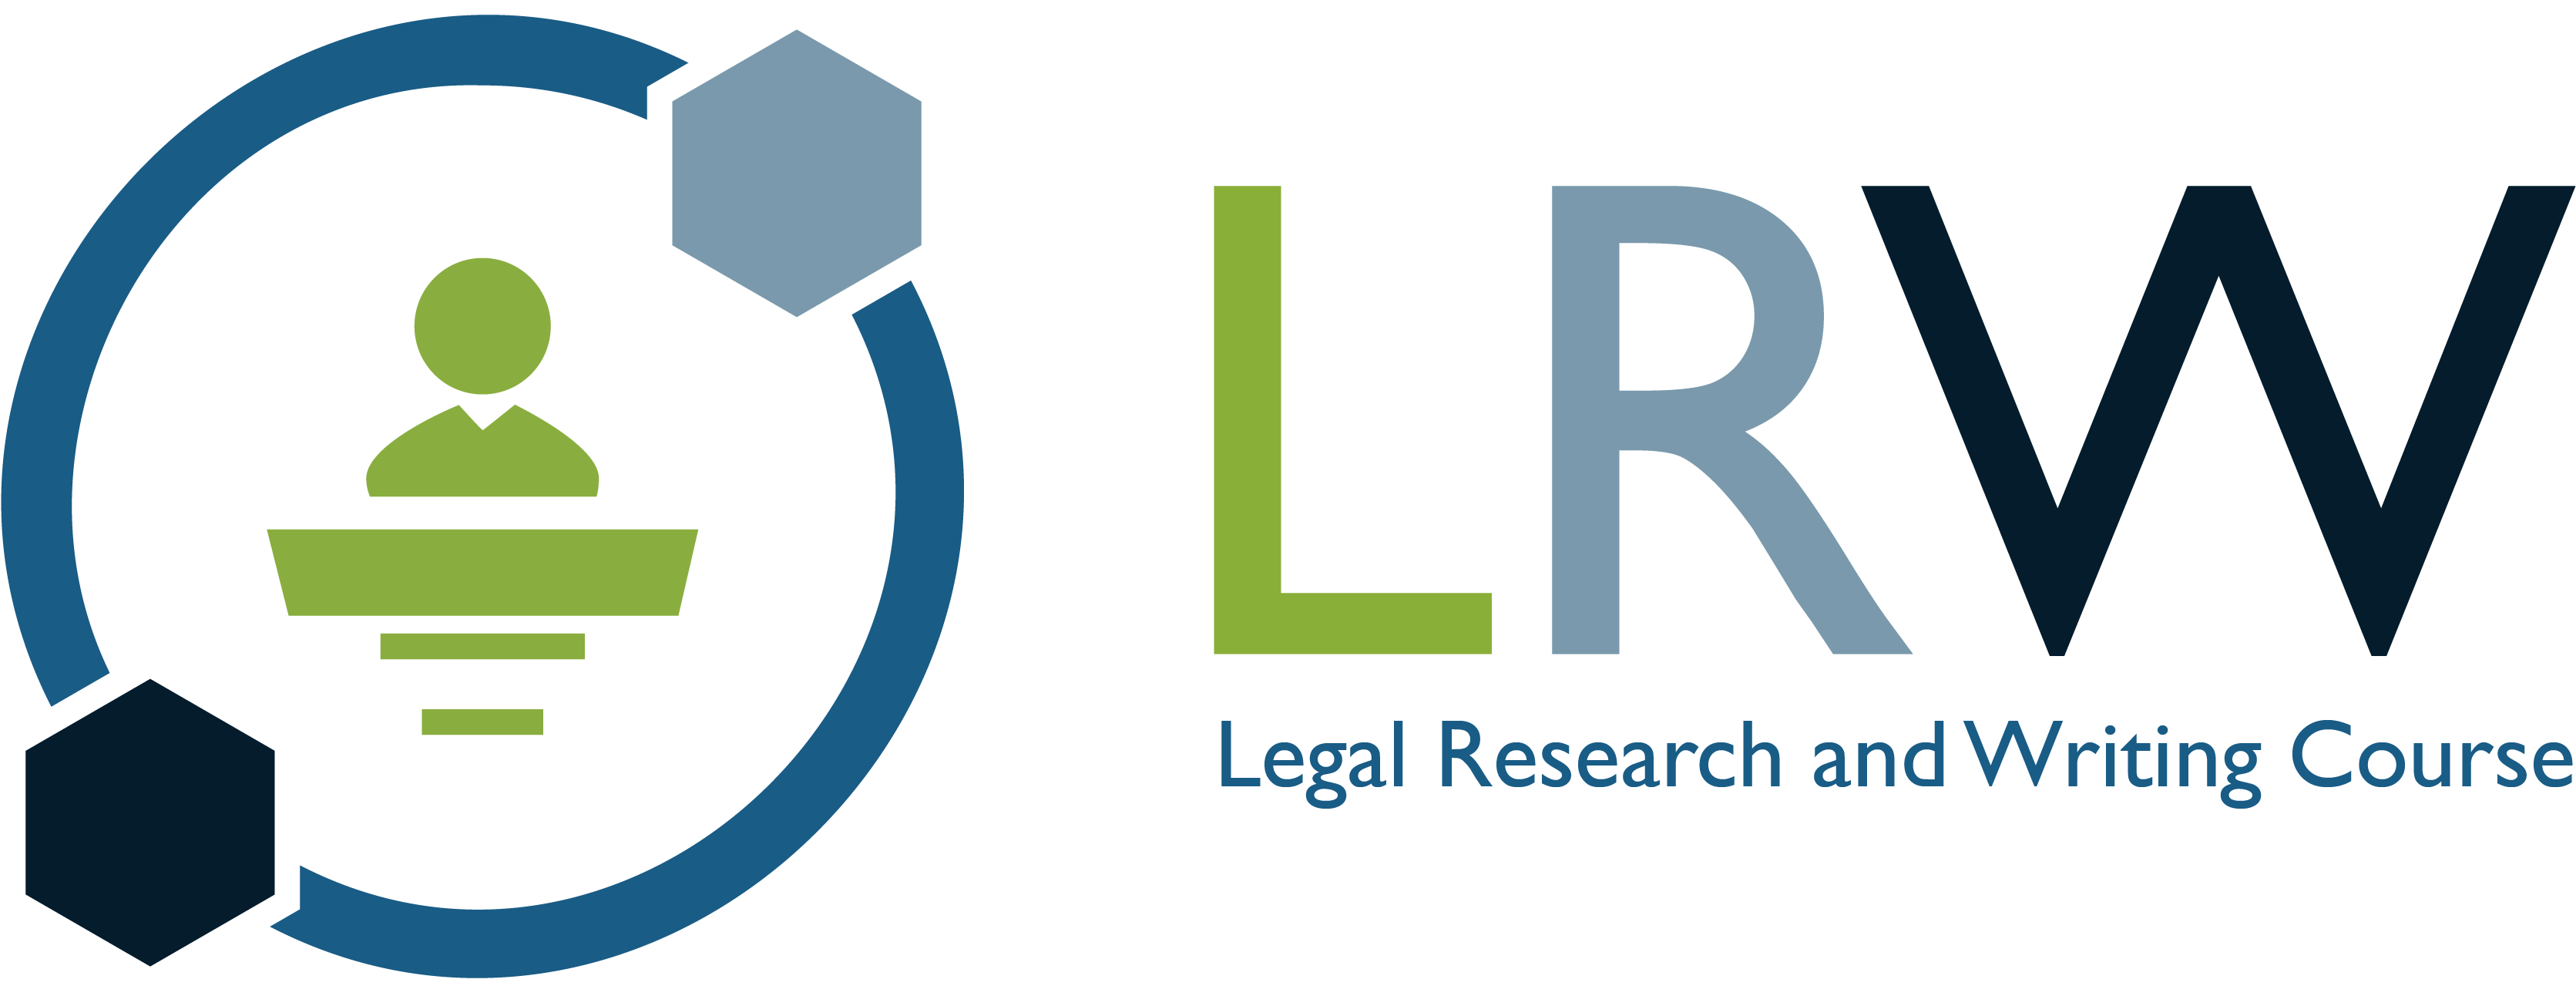 legal research and writing cpled